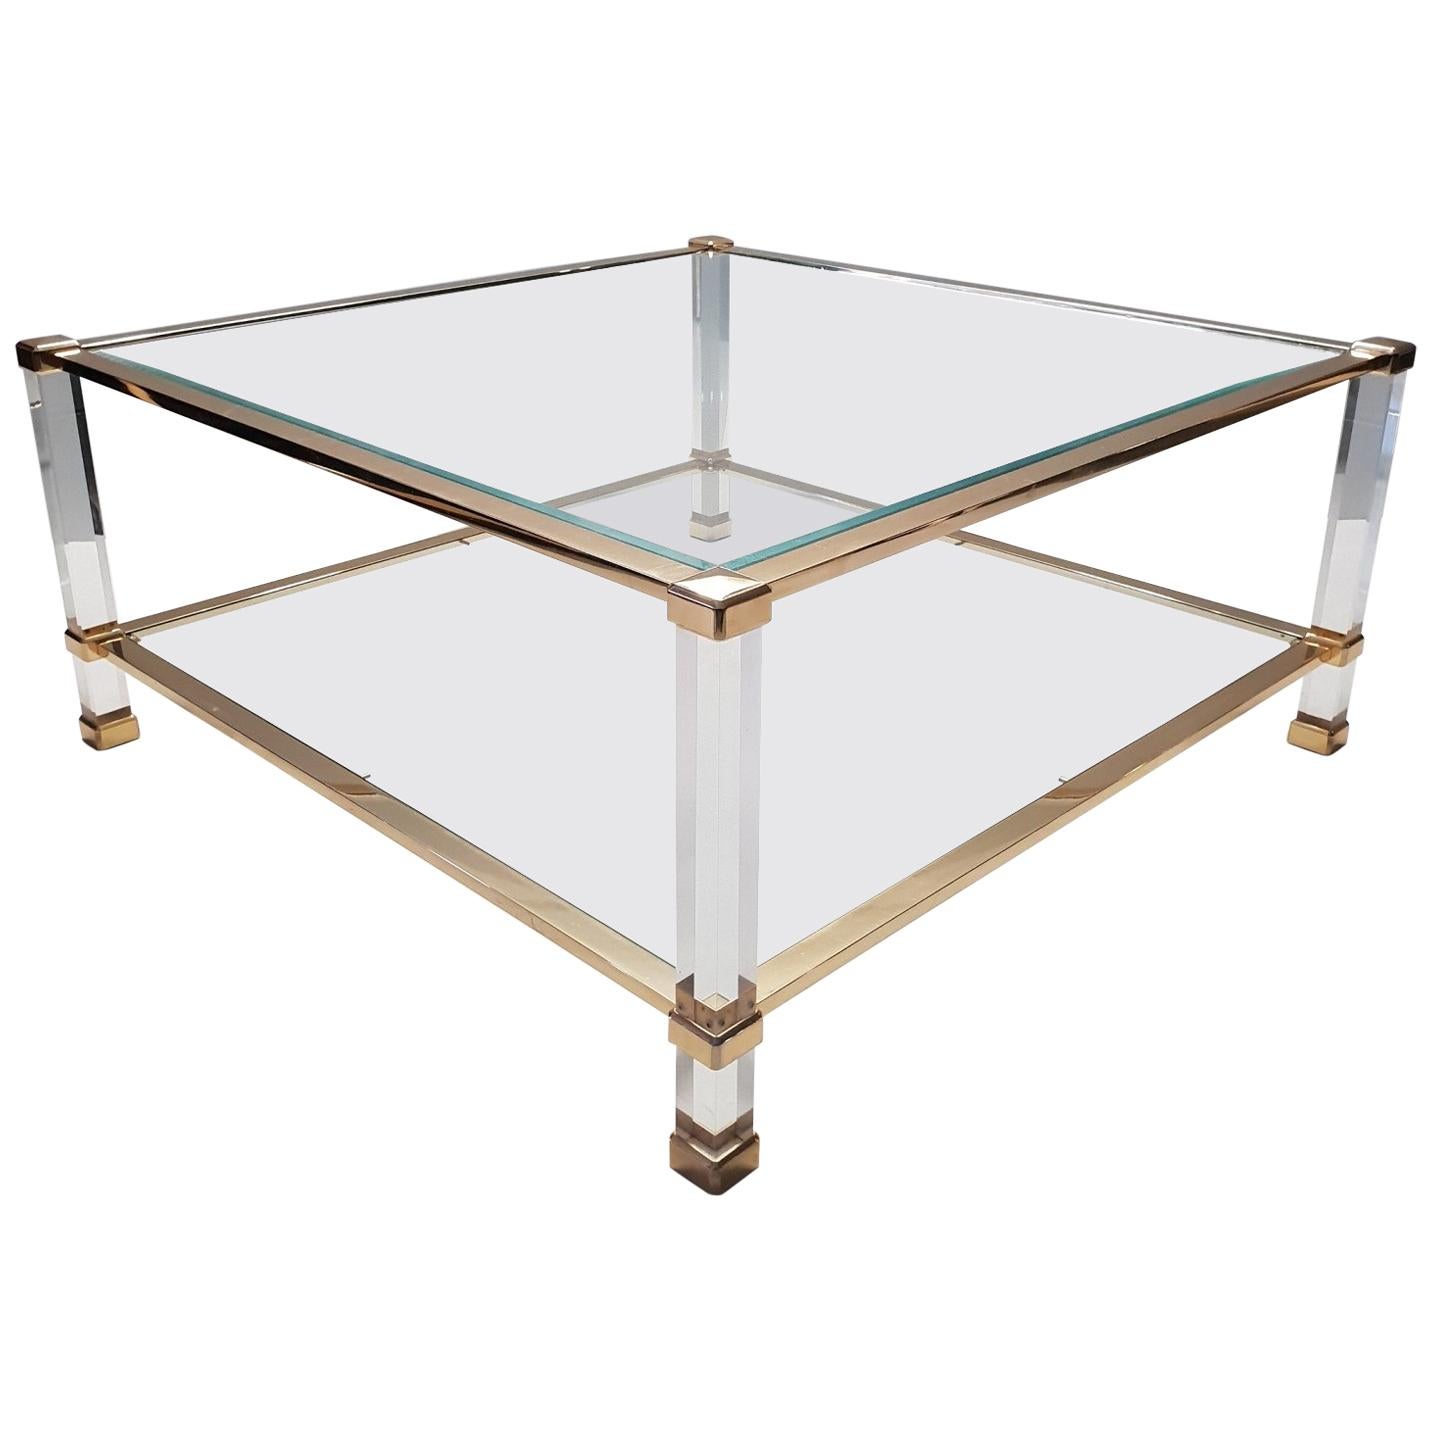 Italian Lucite and Brass Square Coffee Table by Orsenigo, 1970s For Sale